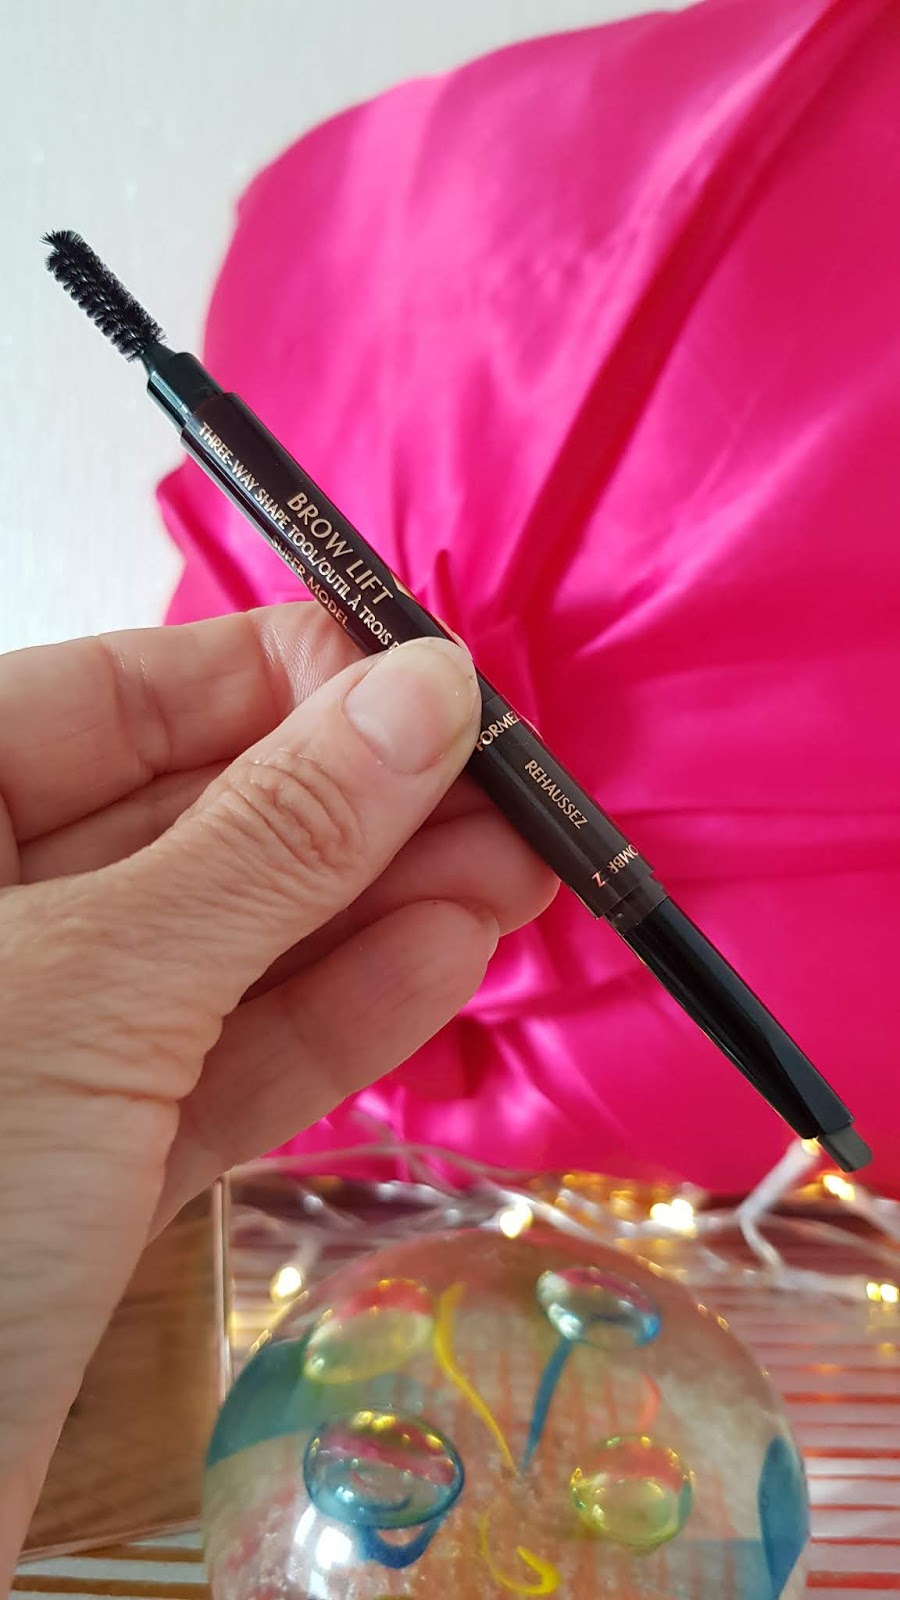 A great tool for shaping and highlighting the brows:  Charlotte Tilbury Brow Lift 